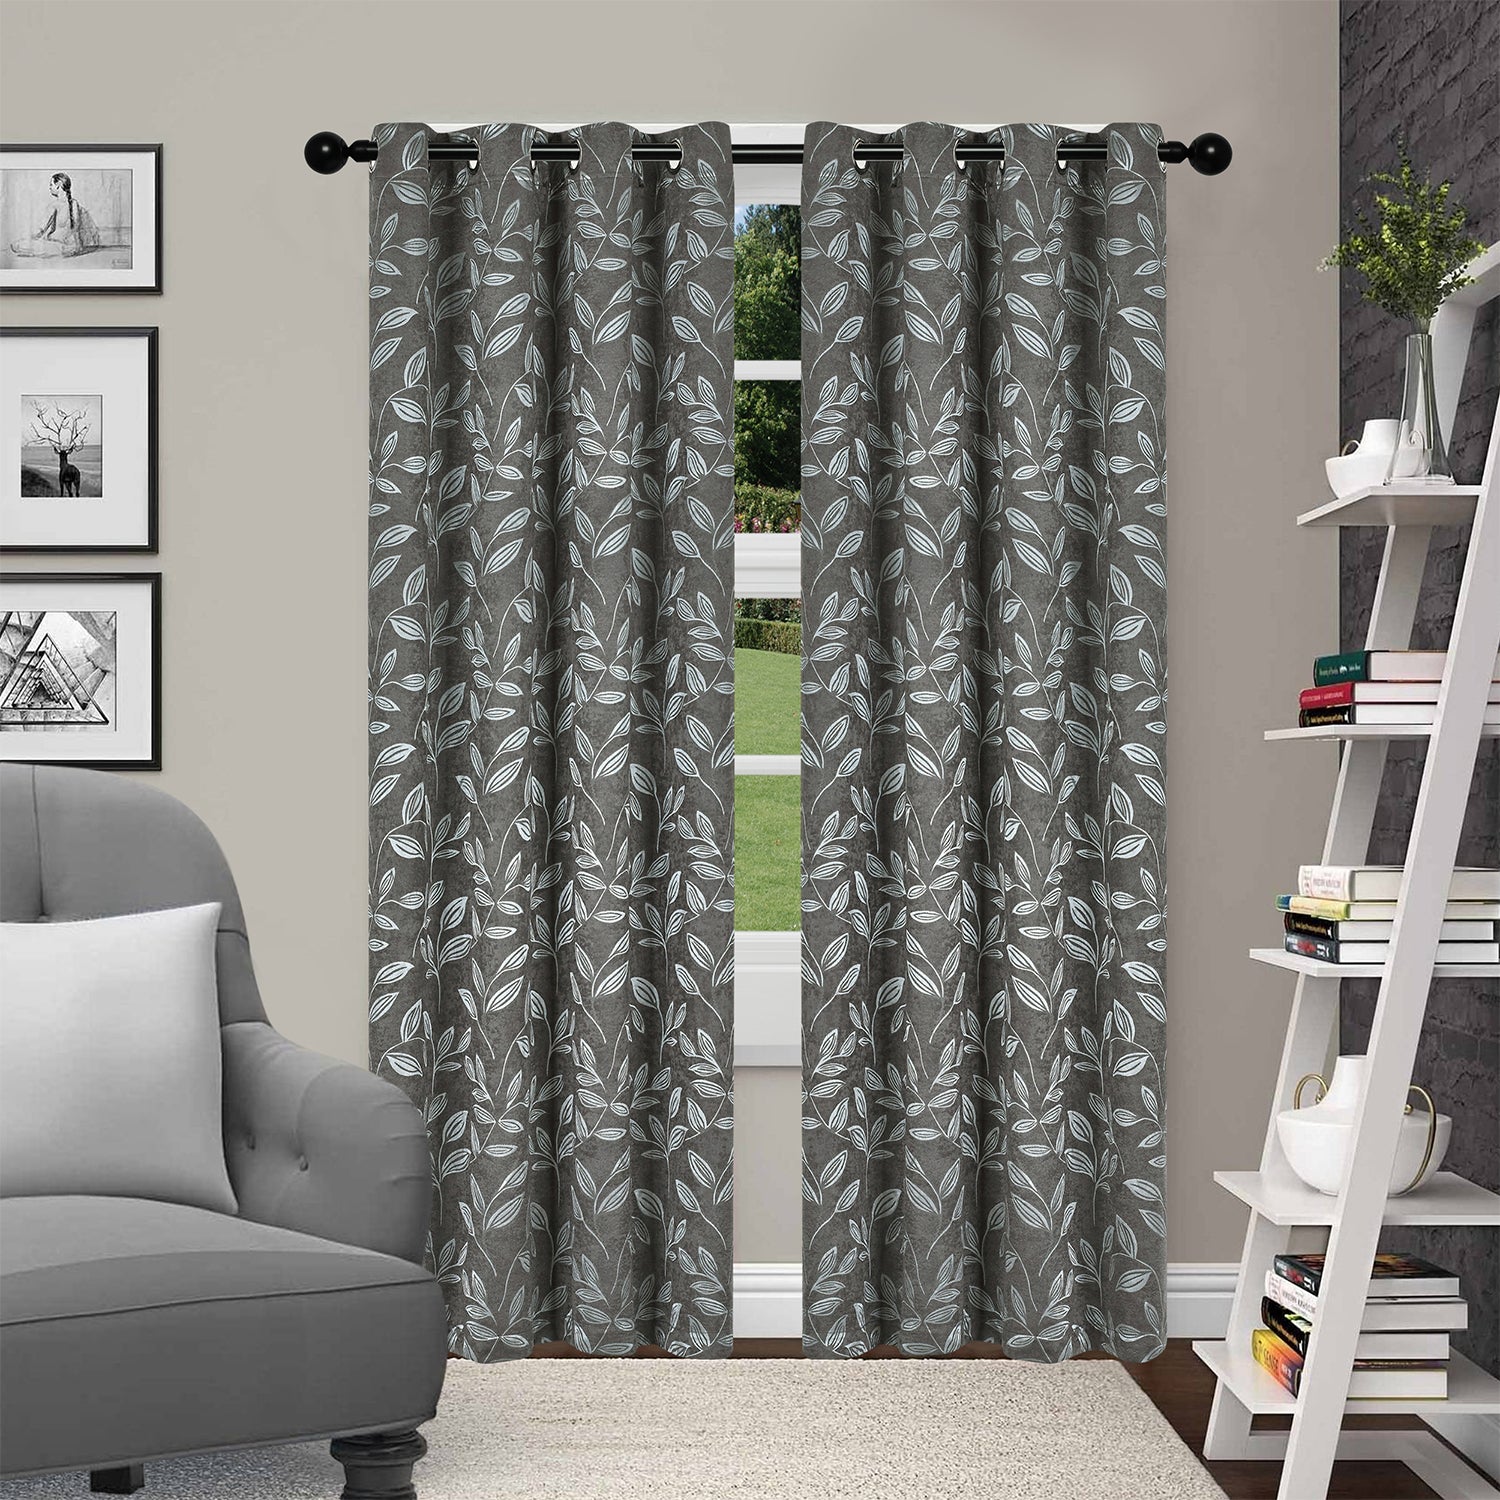 Panels 76" W x 84"L Set of 2 Mansoon Woven Jacquard Insulated Blackout Curtain 